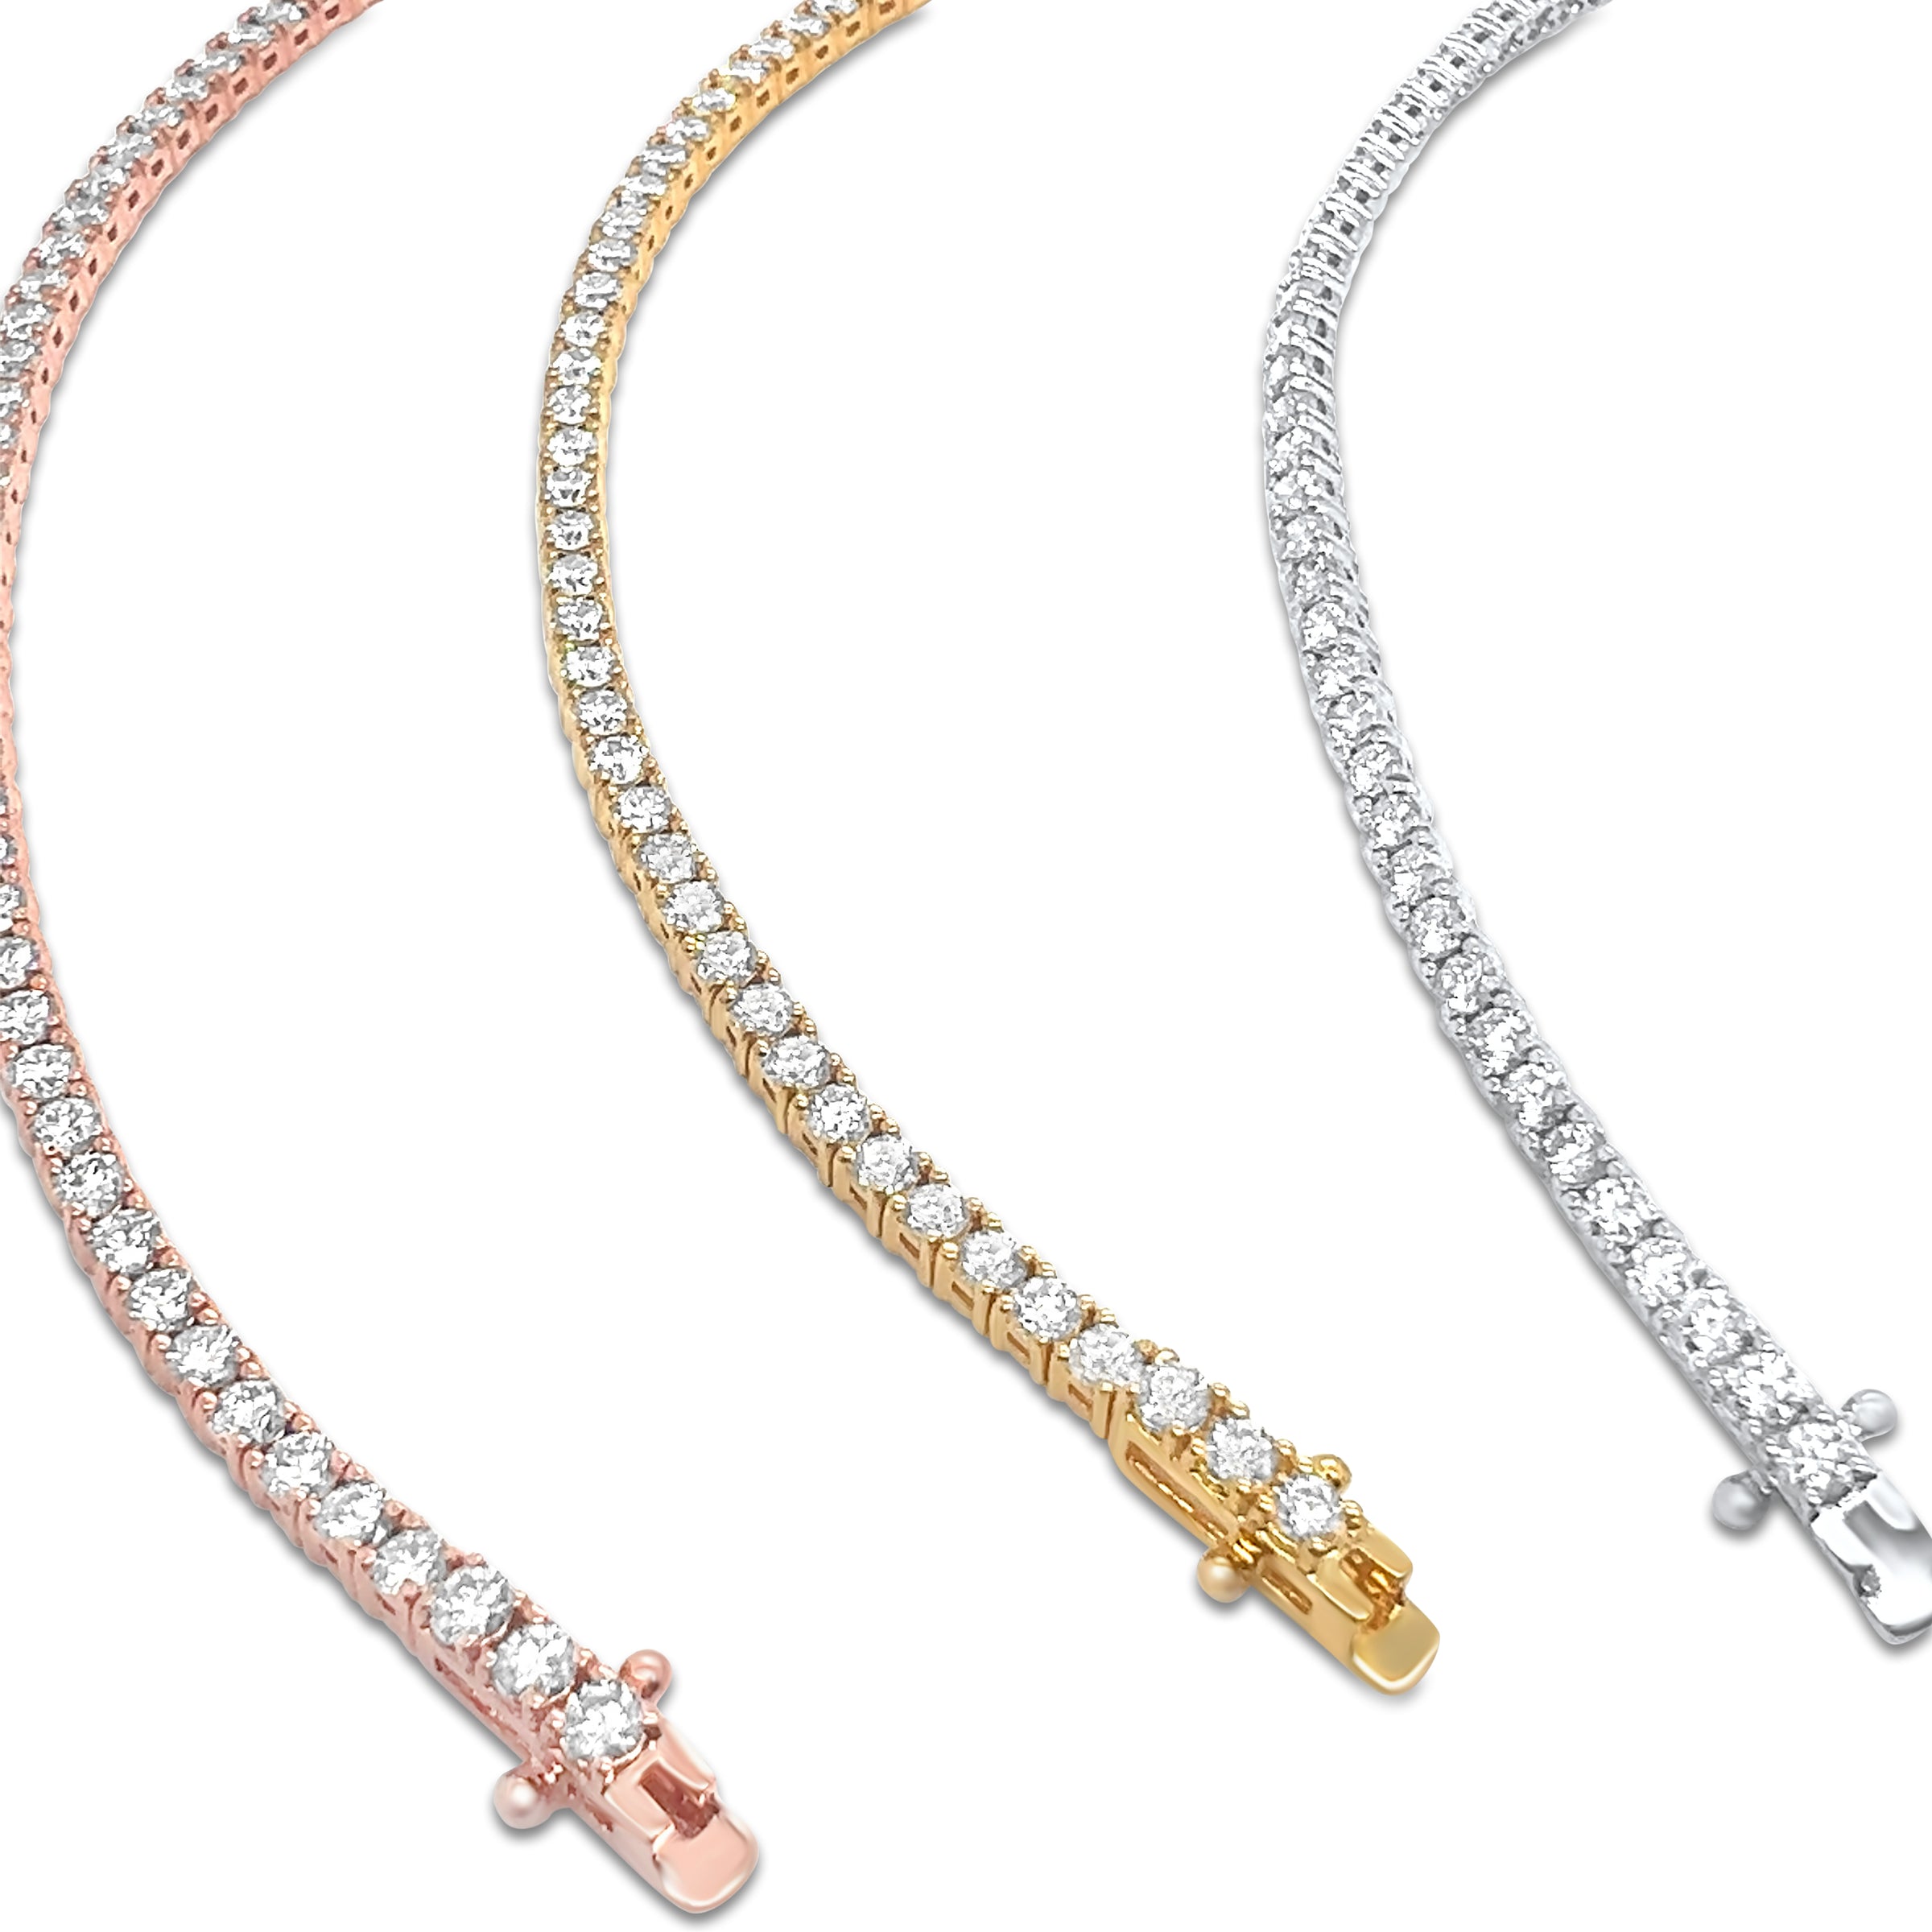 signature diamond tennis bracelets shown in rose gold, yellow gold and white gold.